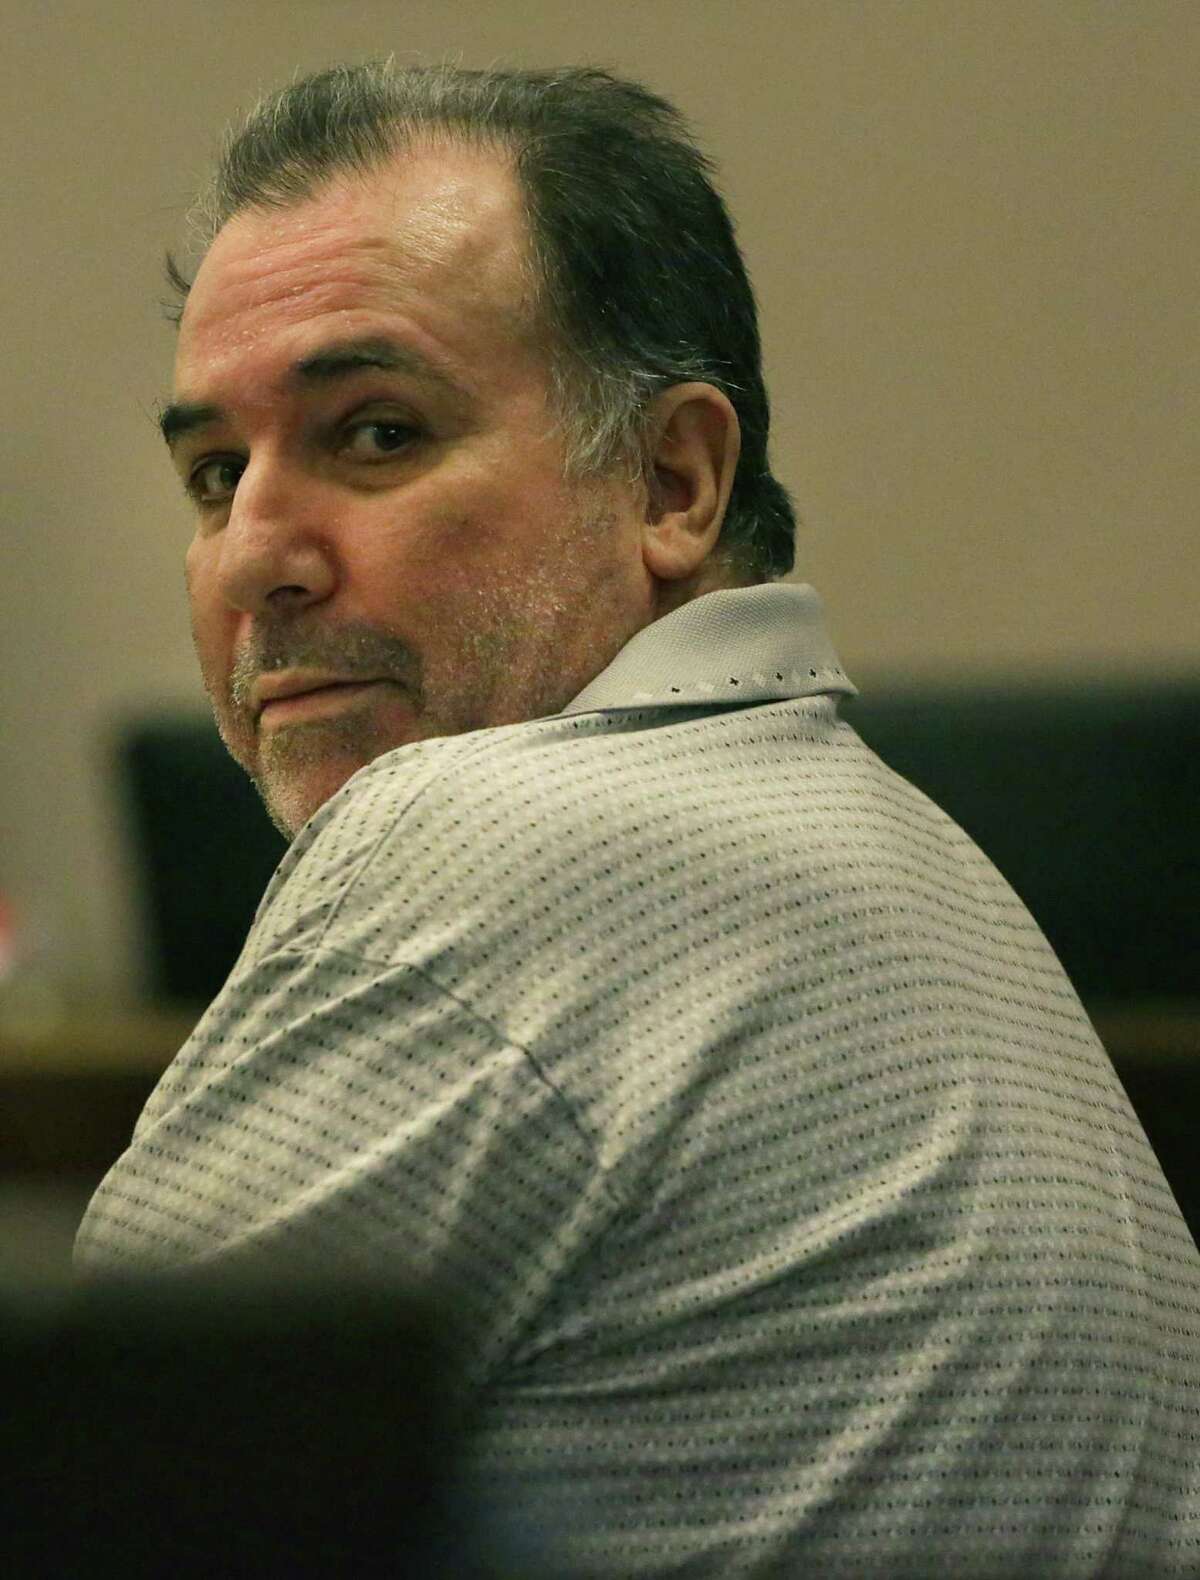 David Wayne Loven, 60, pleaded not guilty by reason of insanity to 90 criminal charges.